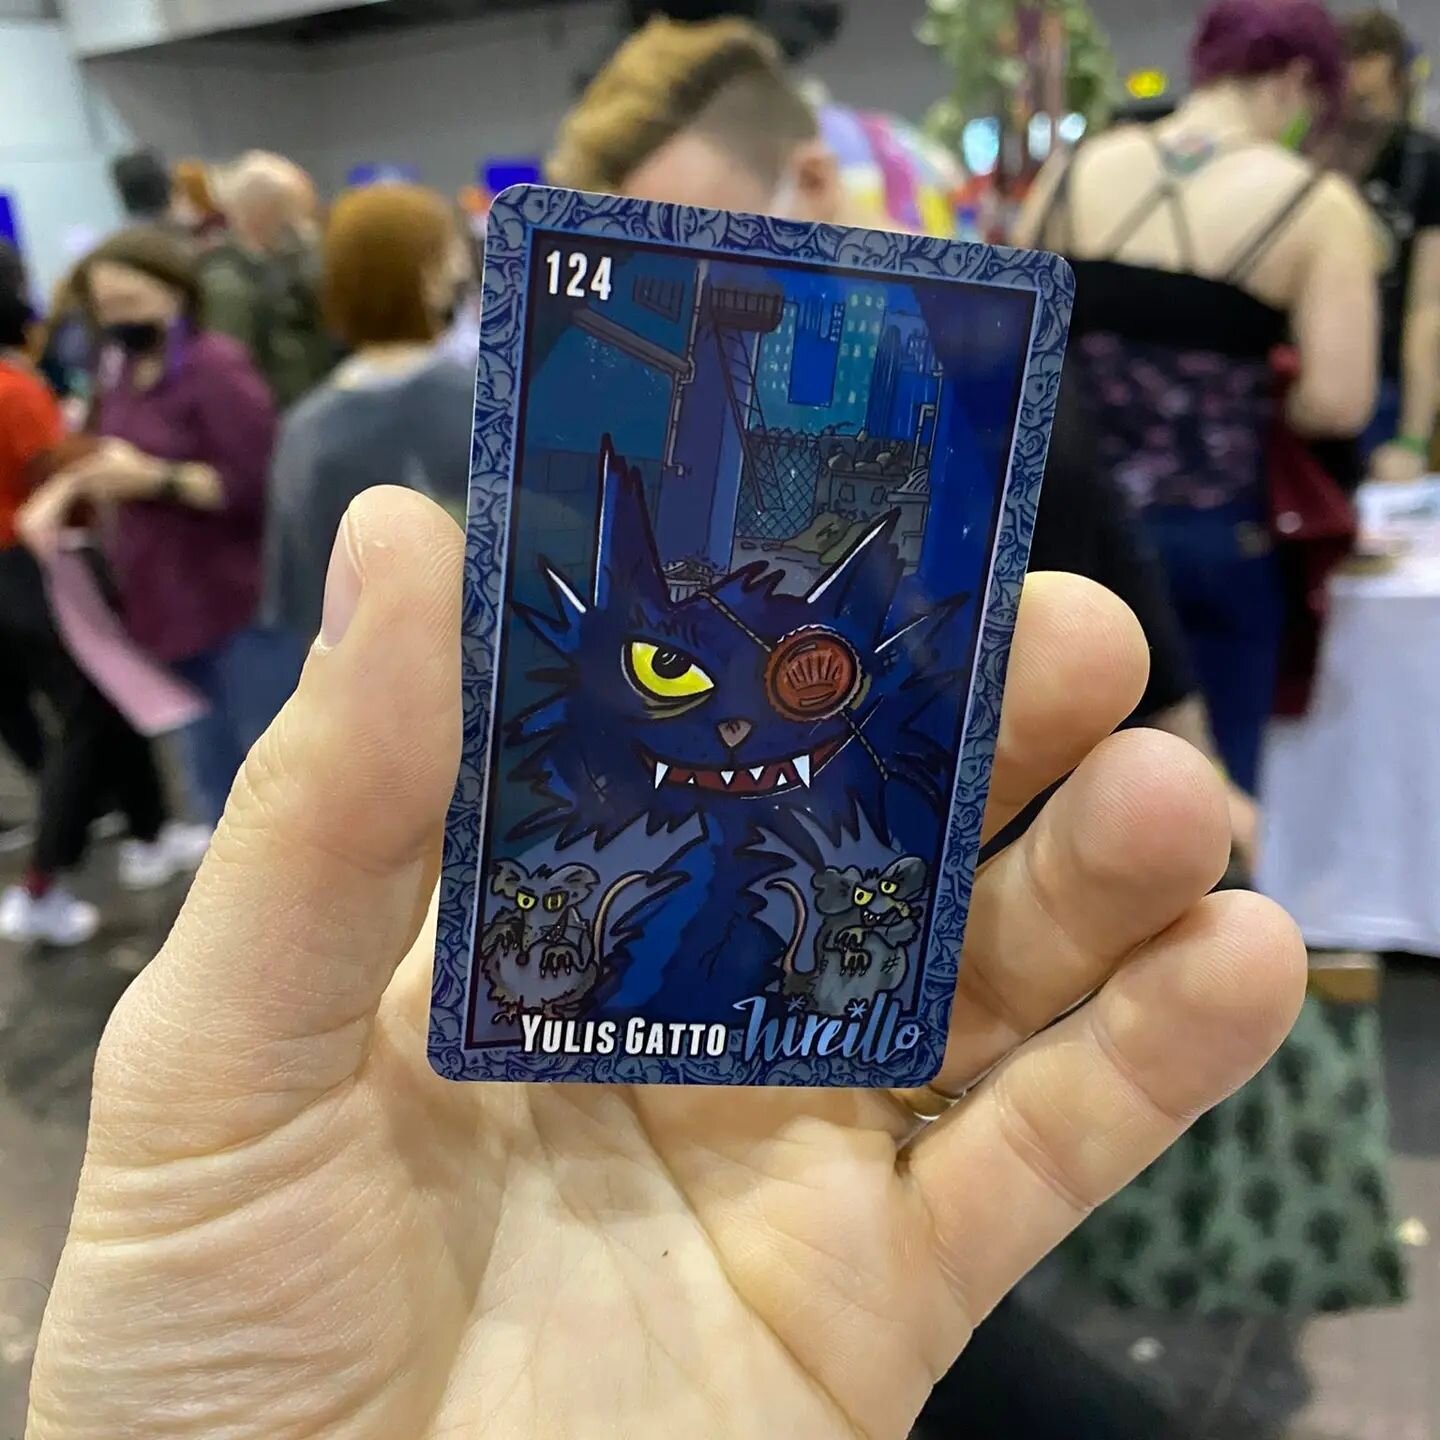 My very evil card for @hireillo in the wild at the @thoughtbubblefestival this past weekend! 
📸 by the lovely @darrendilieto
.
.
.
.
.
.
#hireillo #thoughtbubblefestival #tradingcards #indiecards #VersusEvil #illustrator #artist #illustration #cardg